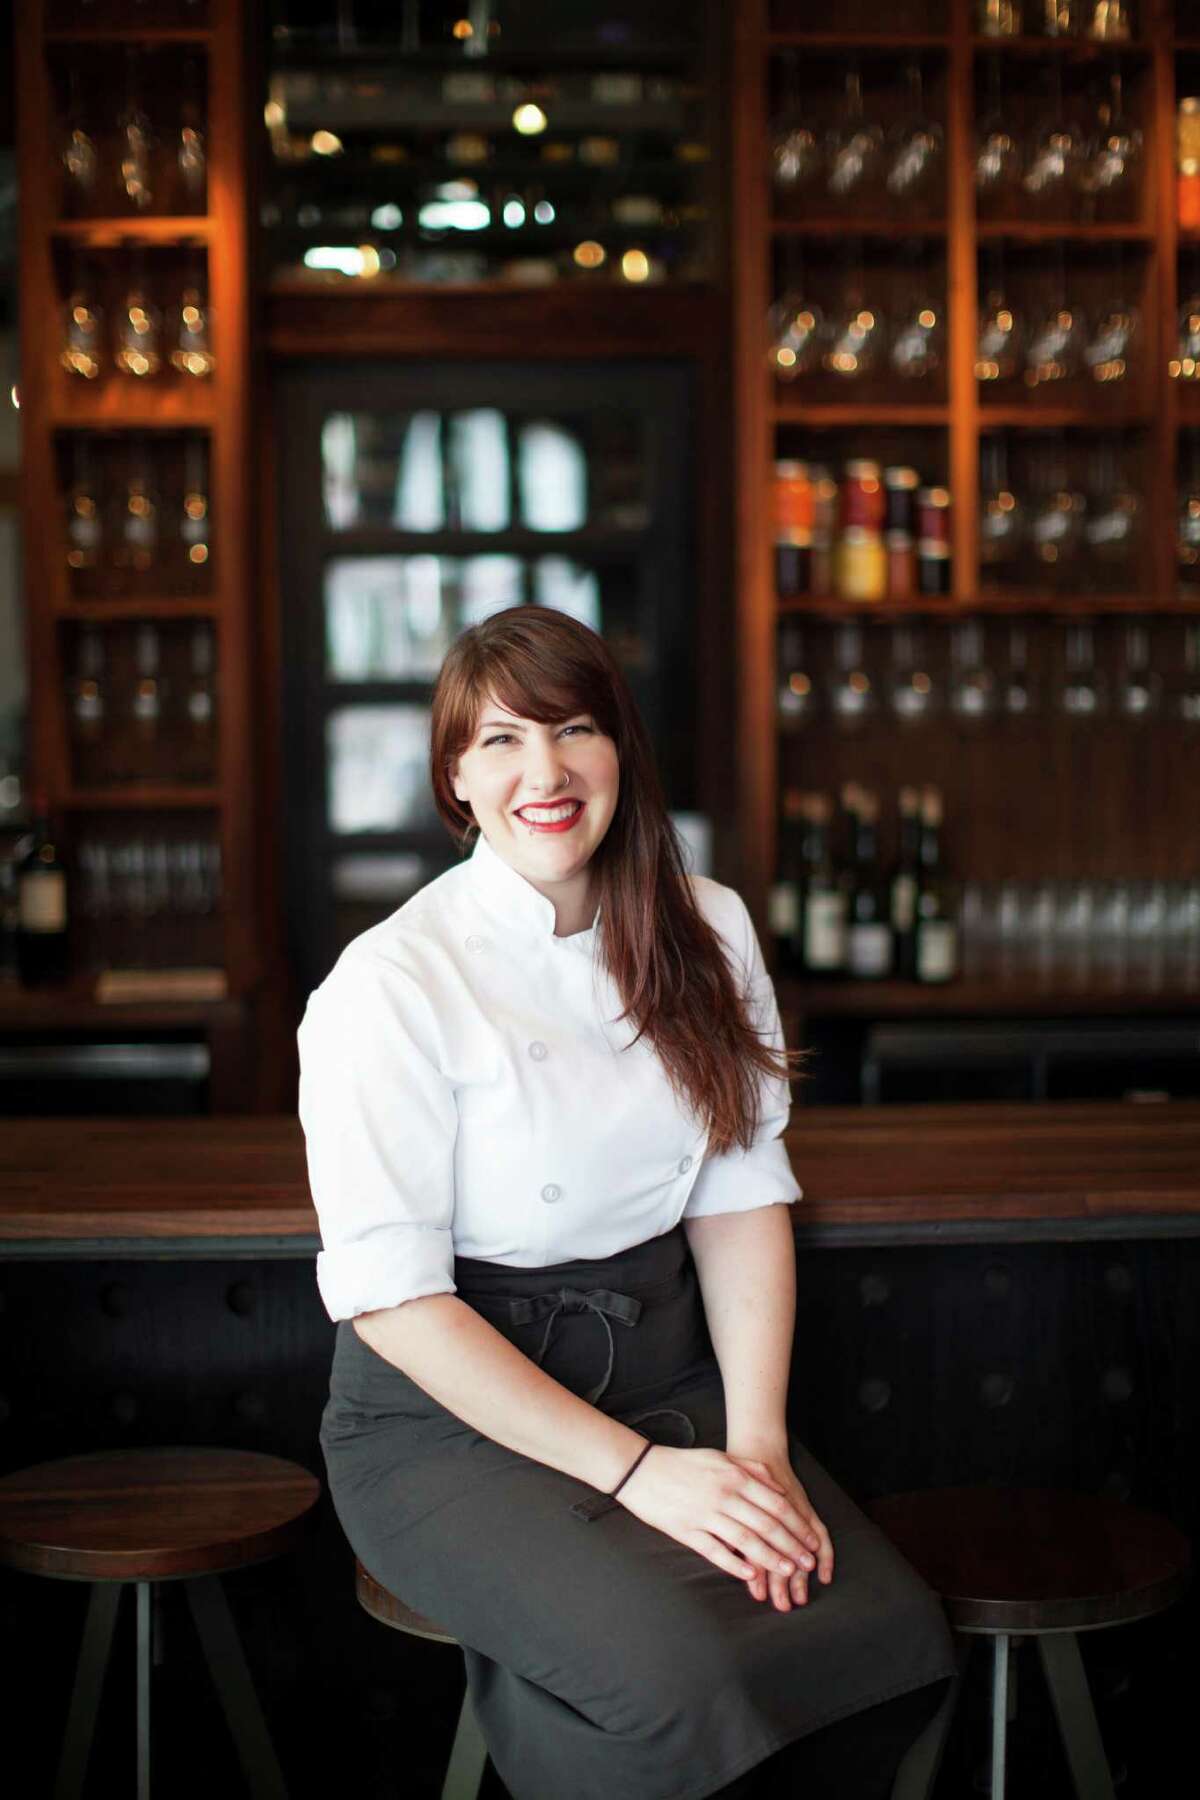 Victoria Dearmond, Underbelly pastry chef, has been named a semifinalist for 2016 Eater Young Guns, which recognizes new talent under age 30 in the food and beverage industry.